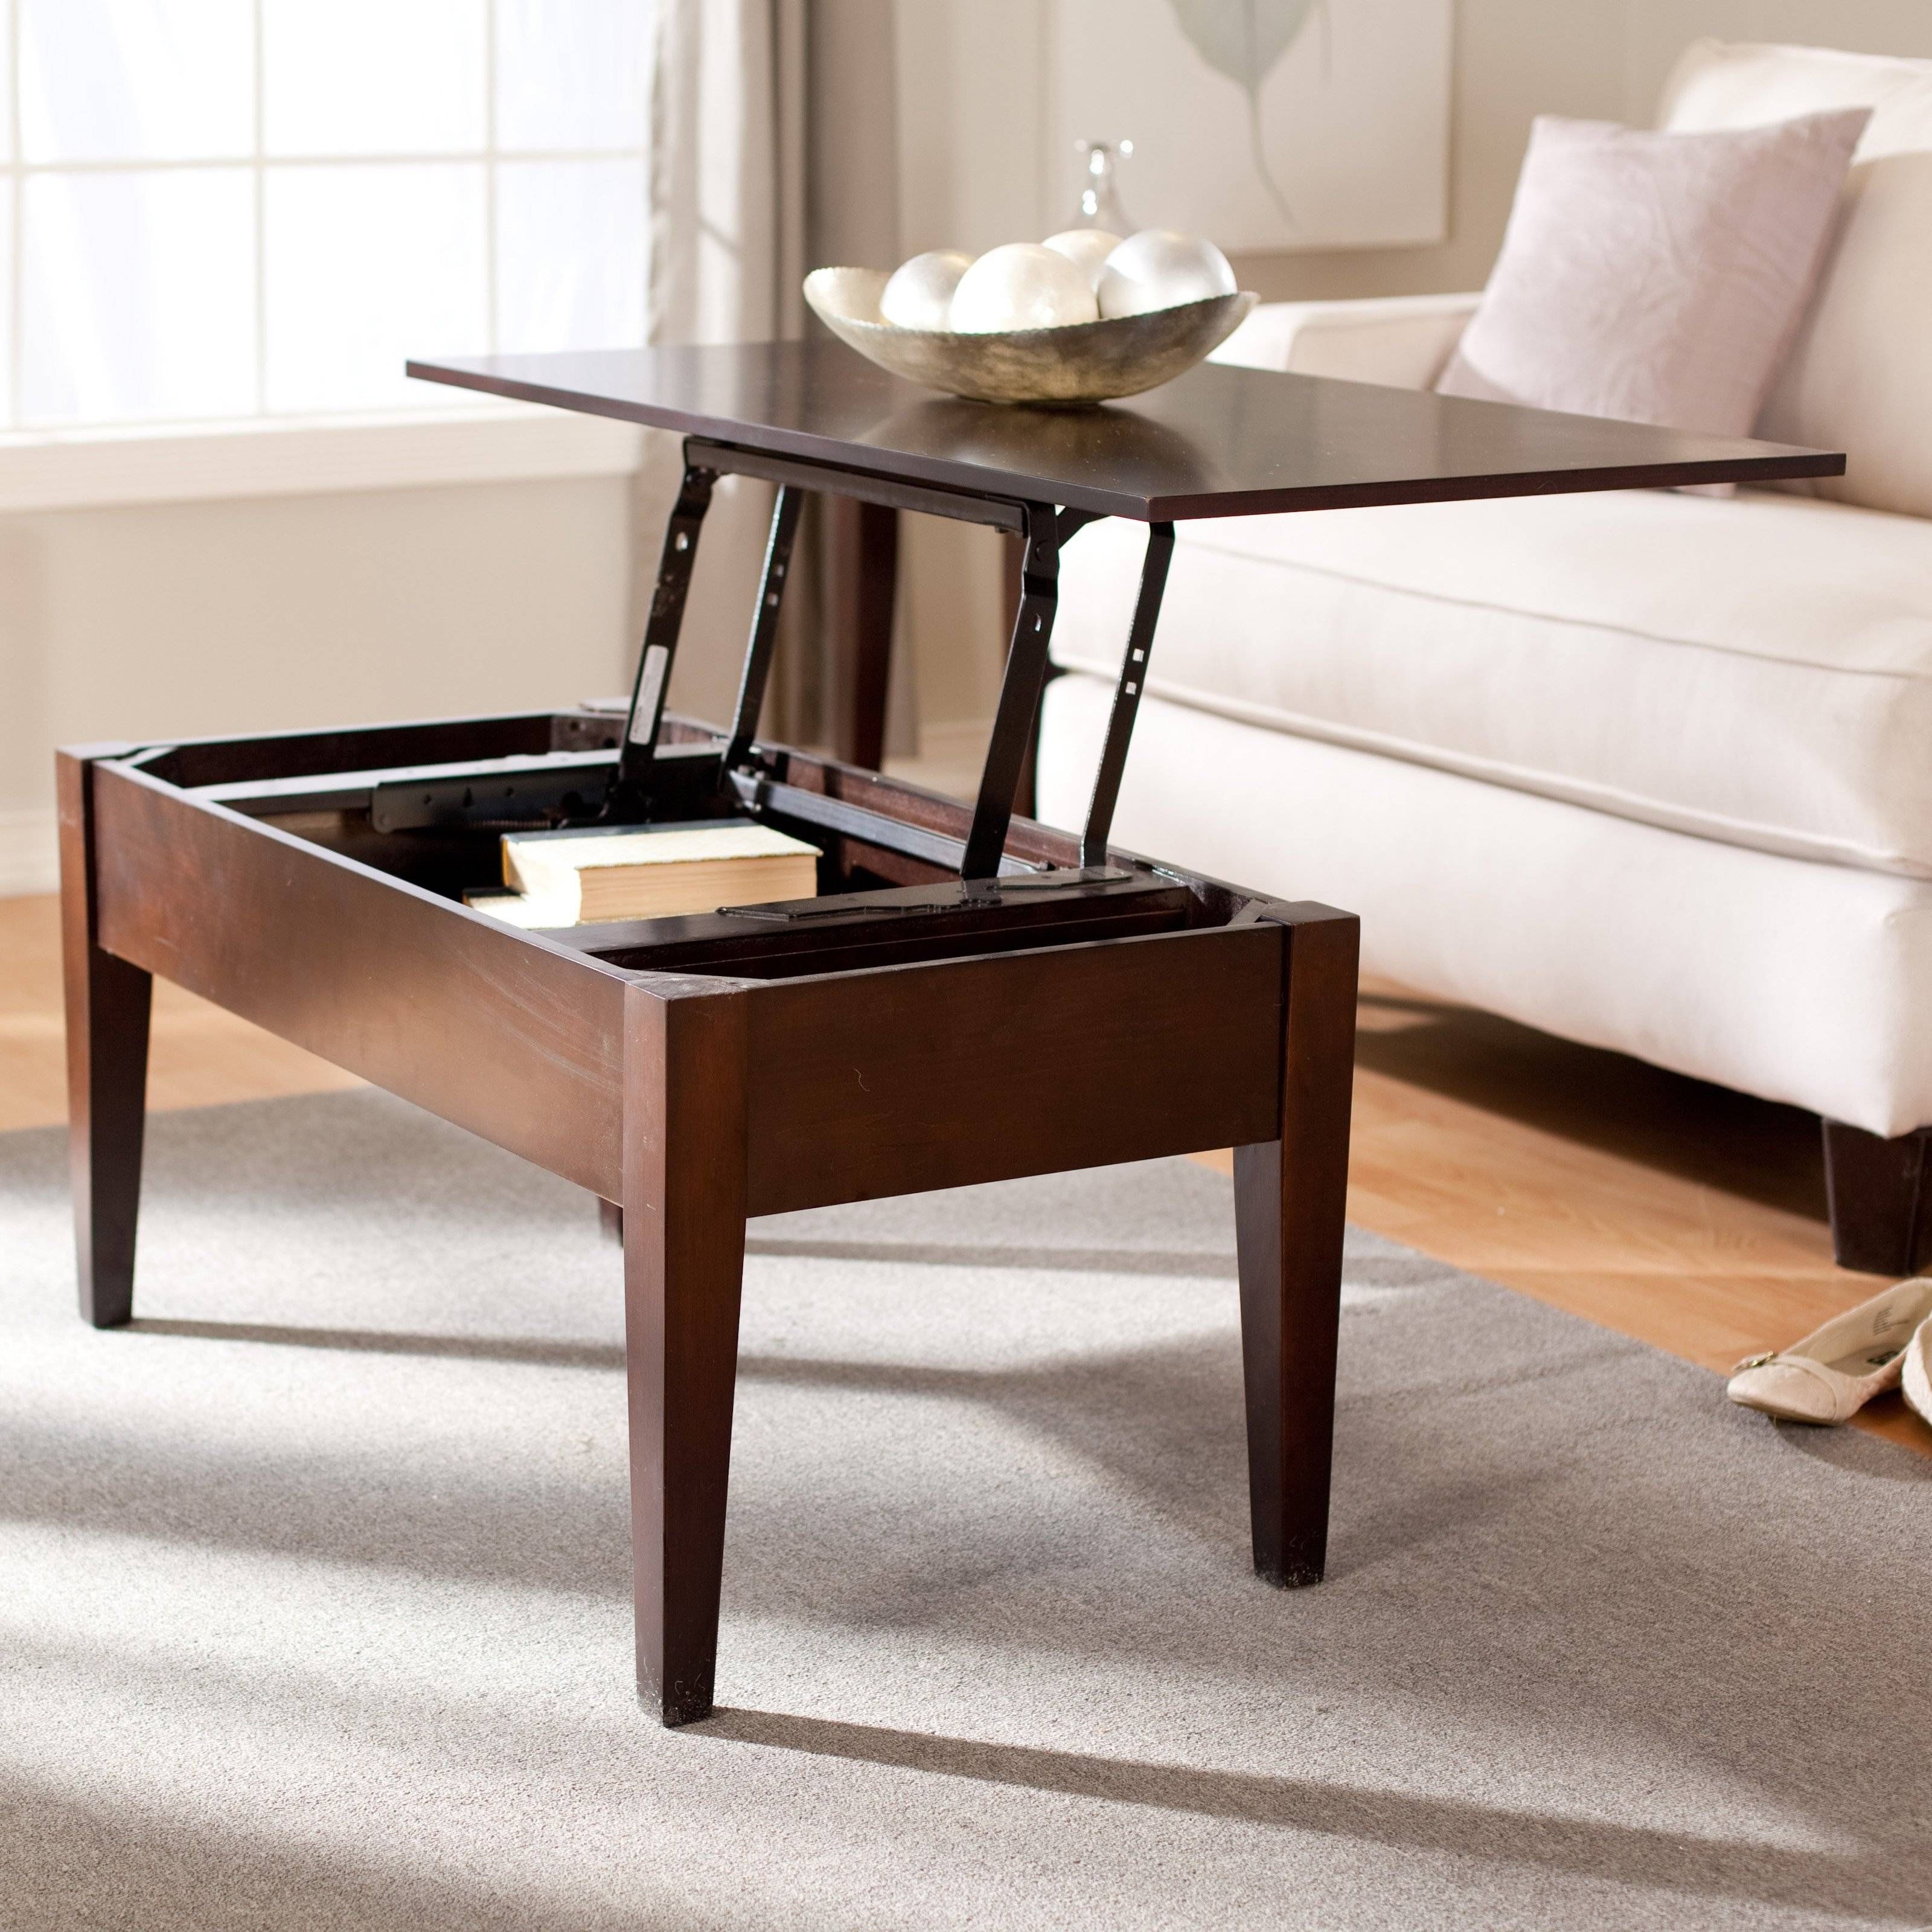 Turner Lift Top Coffee Table – Espresso | Hayneedle For Top Lifting Coffee Tables (View 4 of 30)